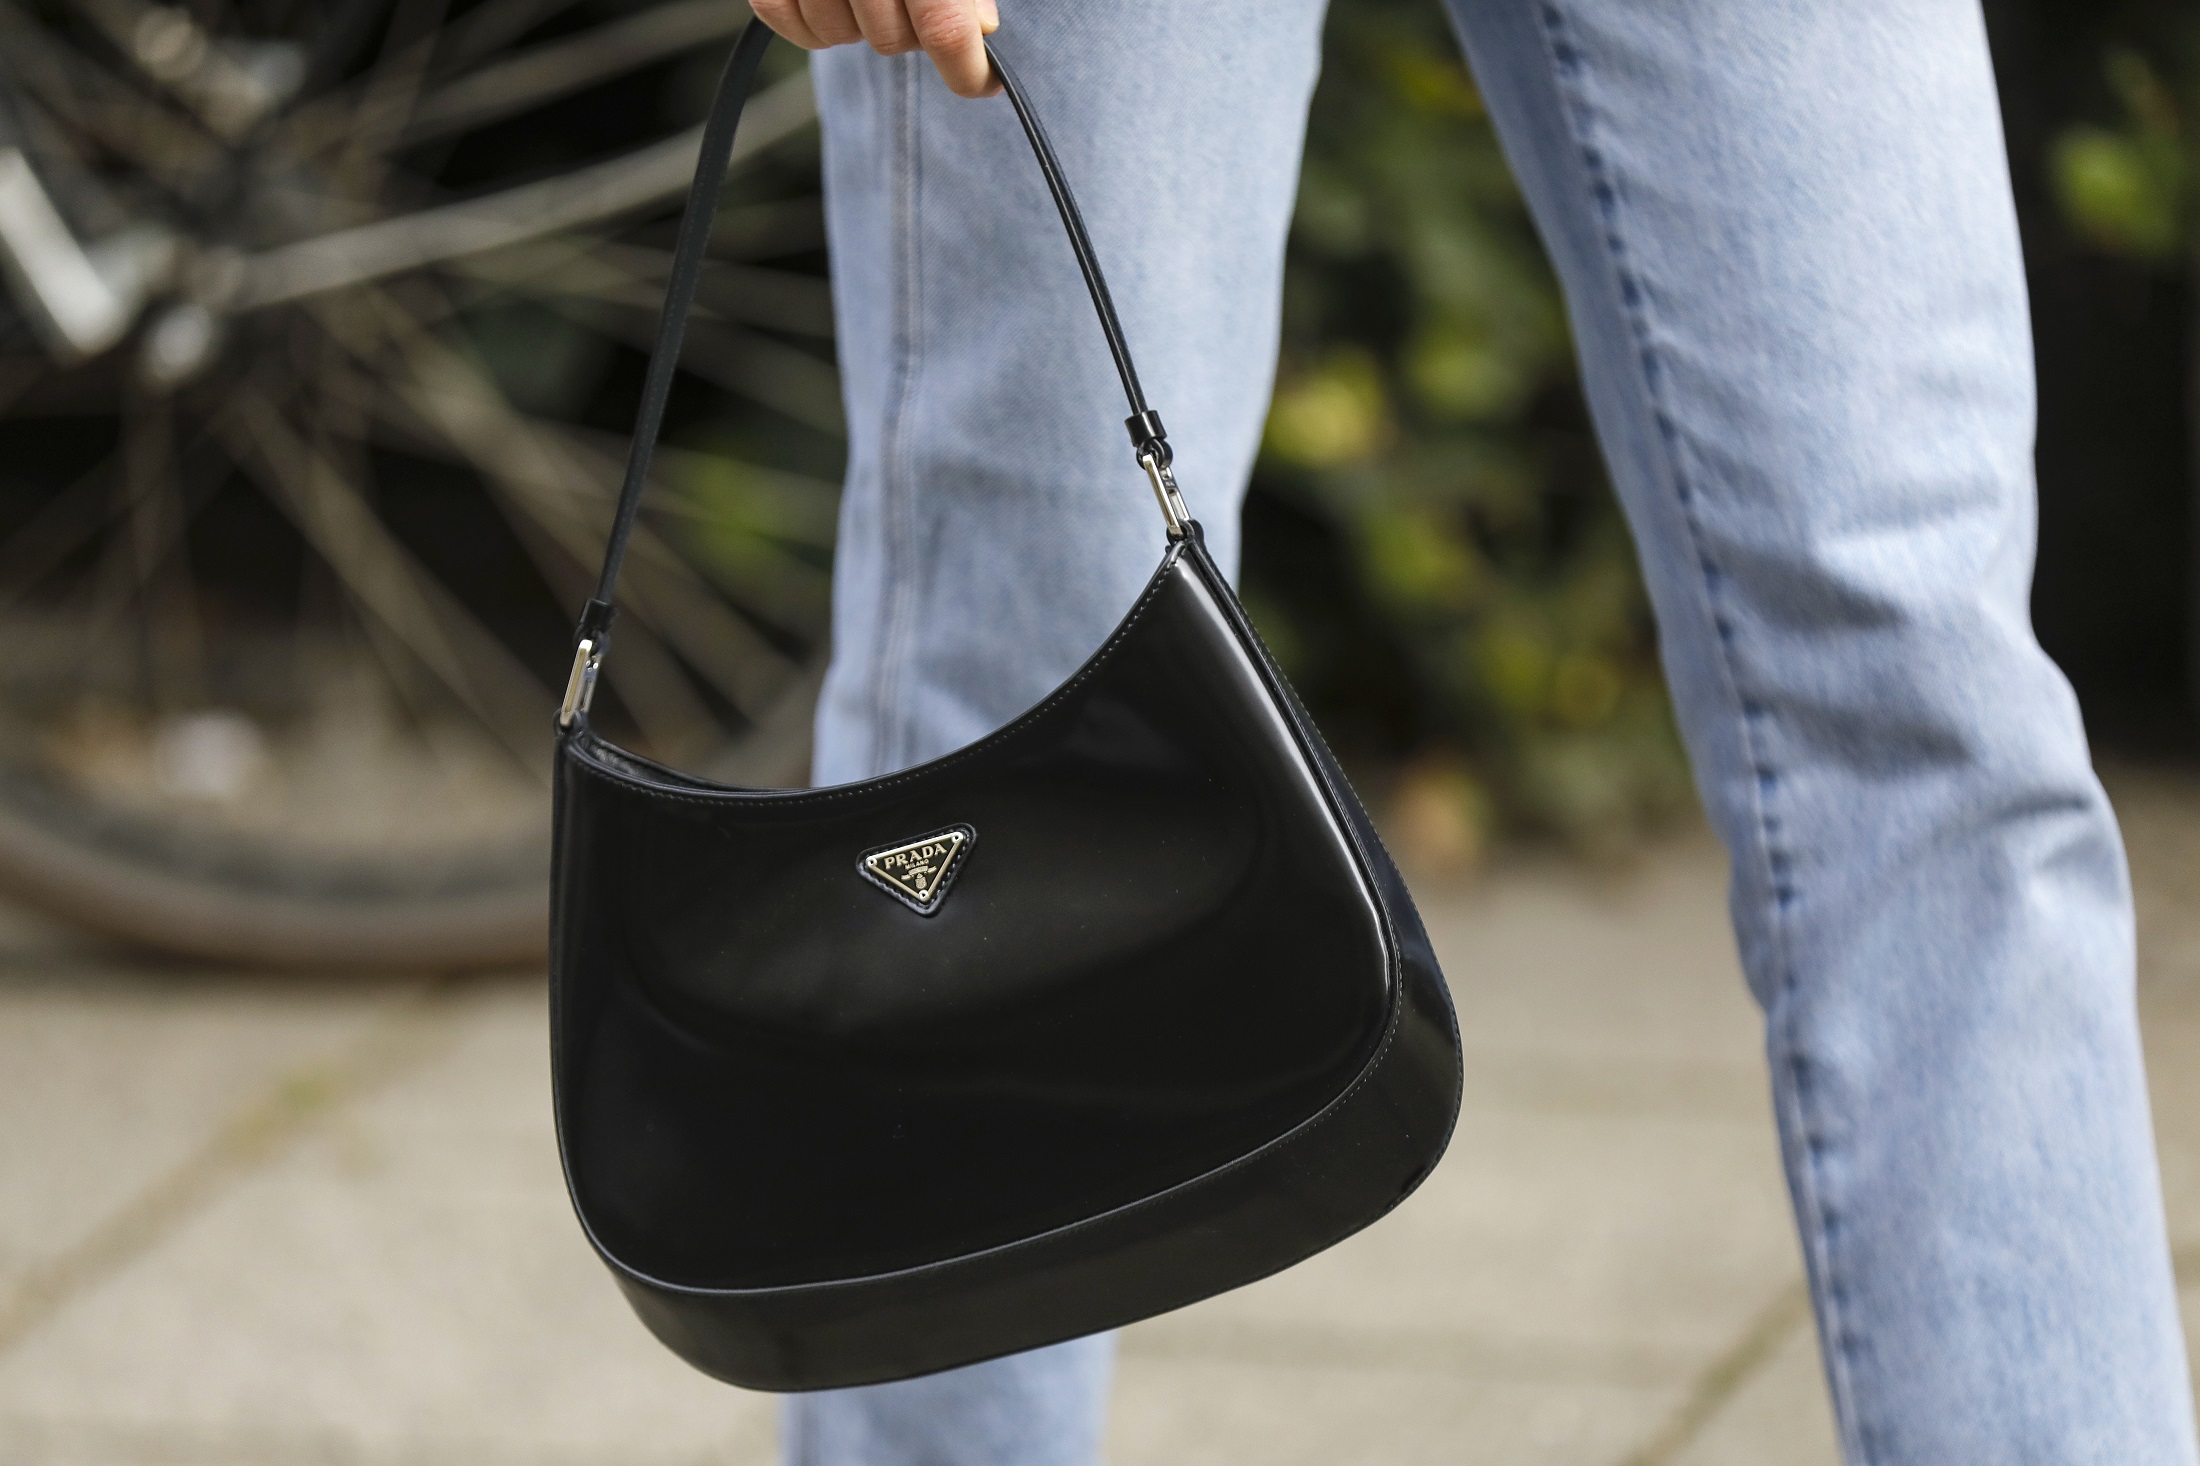 Black handbag – a classic that every elegant woman should invest in